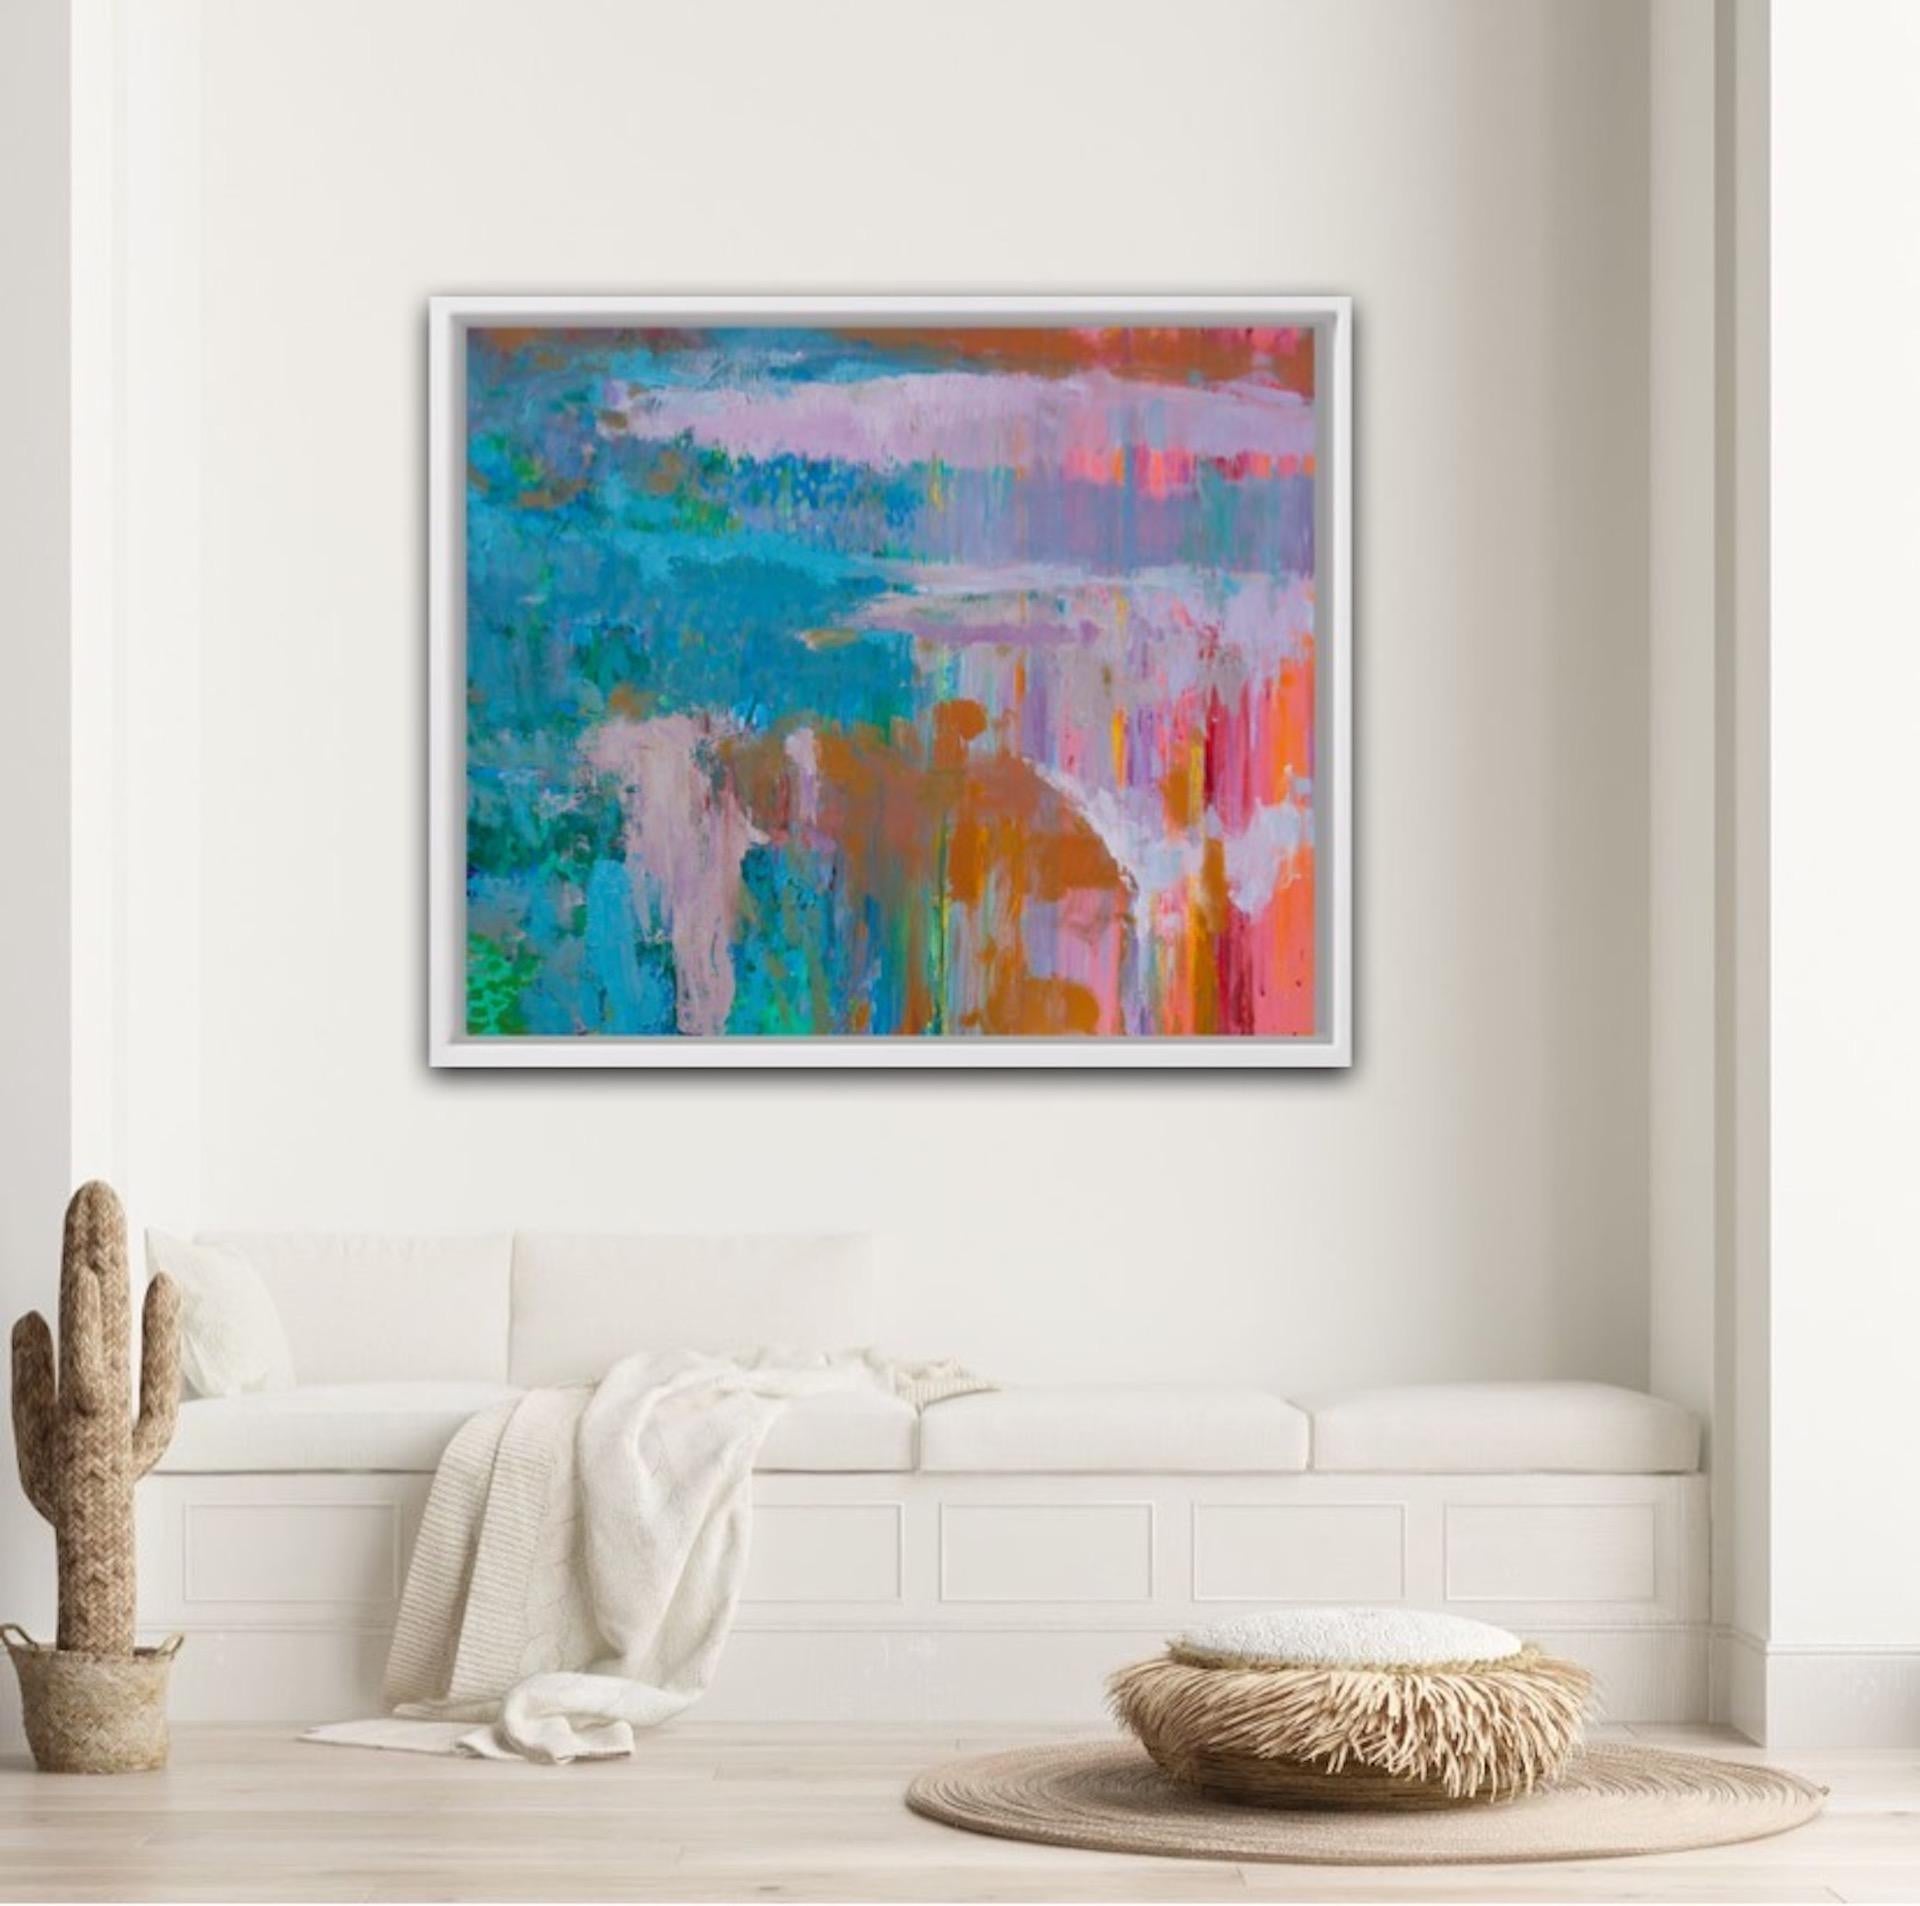 Teresa Pemberton
Light on Water
Contemporary Abstract Painting
Oil Paint on Canvas
Canvas Size: H 100cm x W 120cm
Sold Unframed
Please note that insitu images are purely an indication of how a piece may look

Light on Water is an original landscape